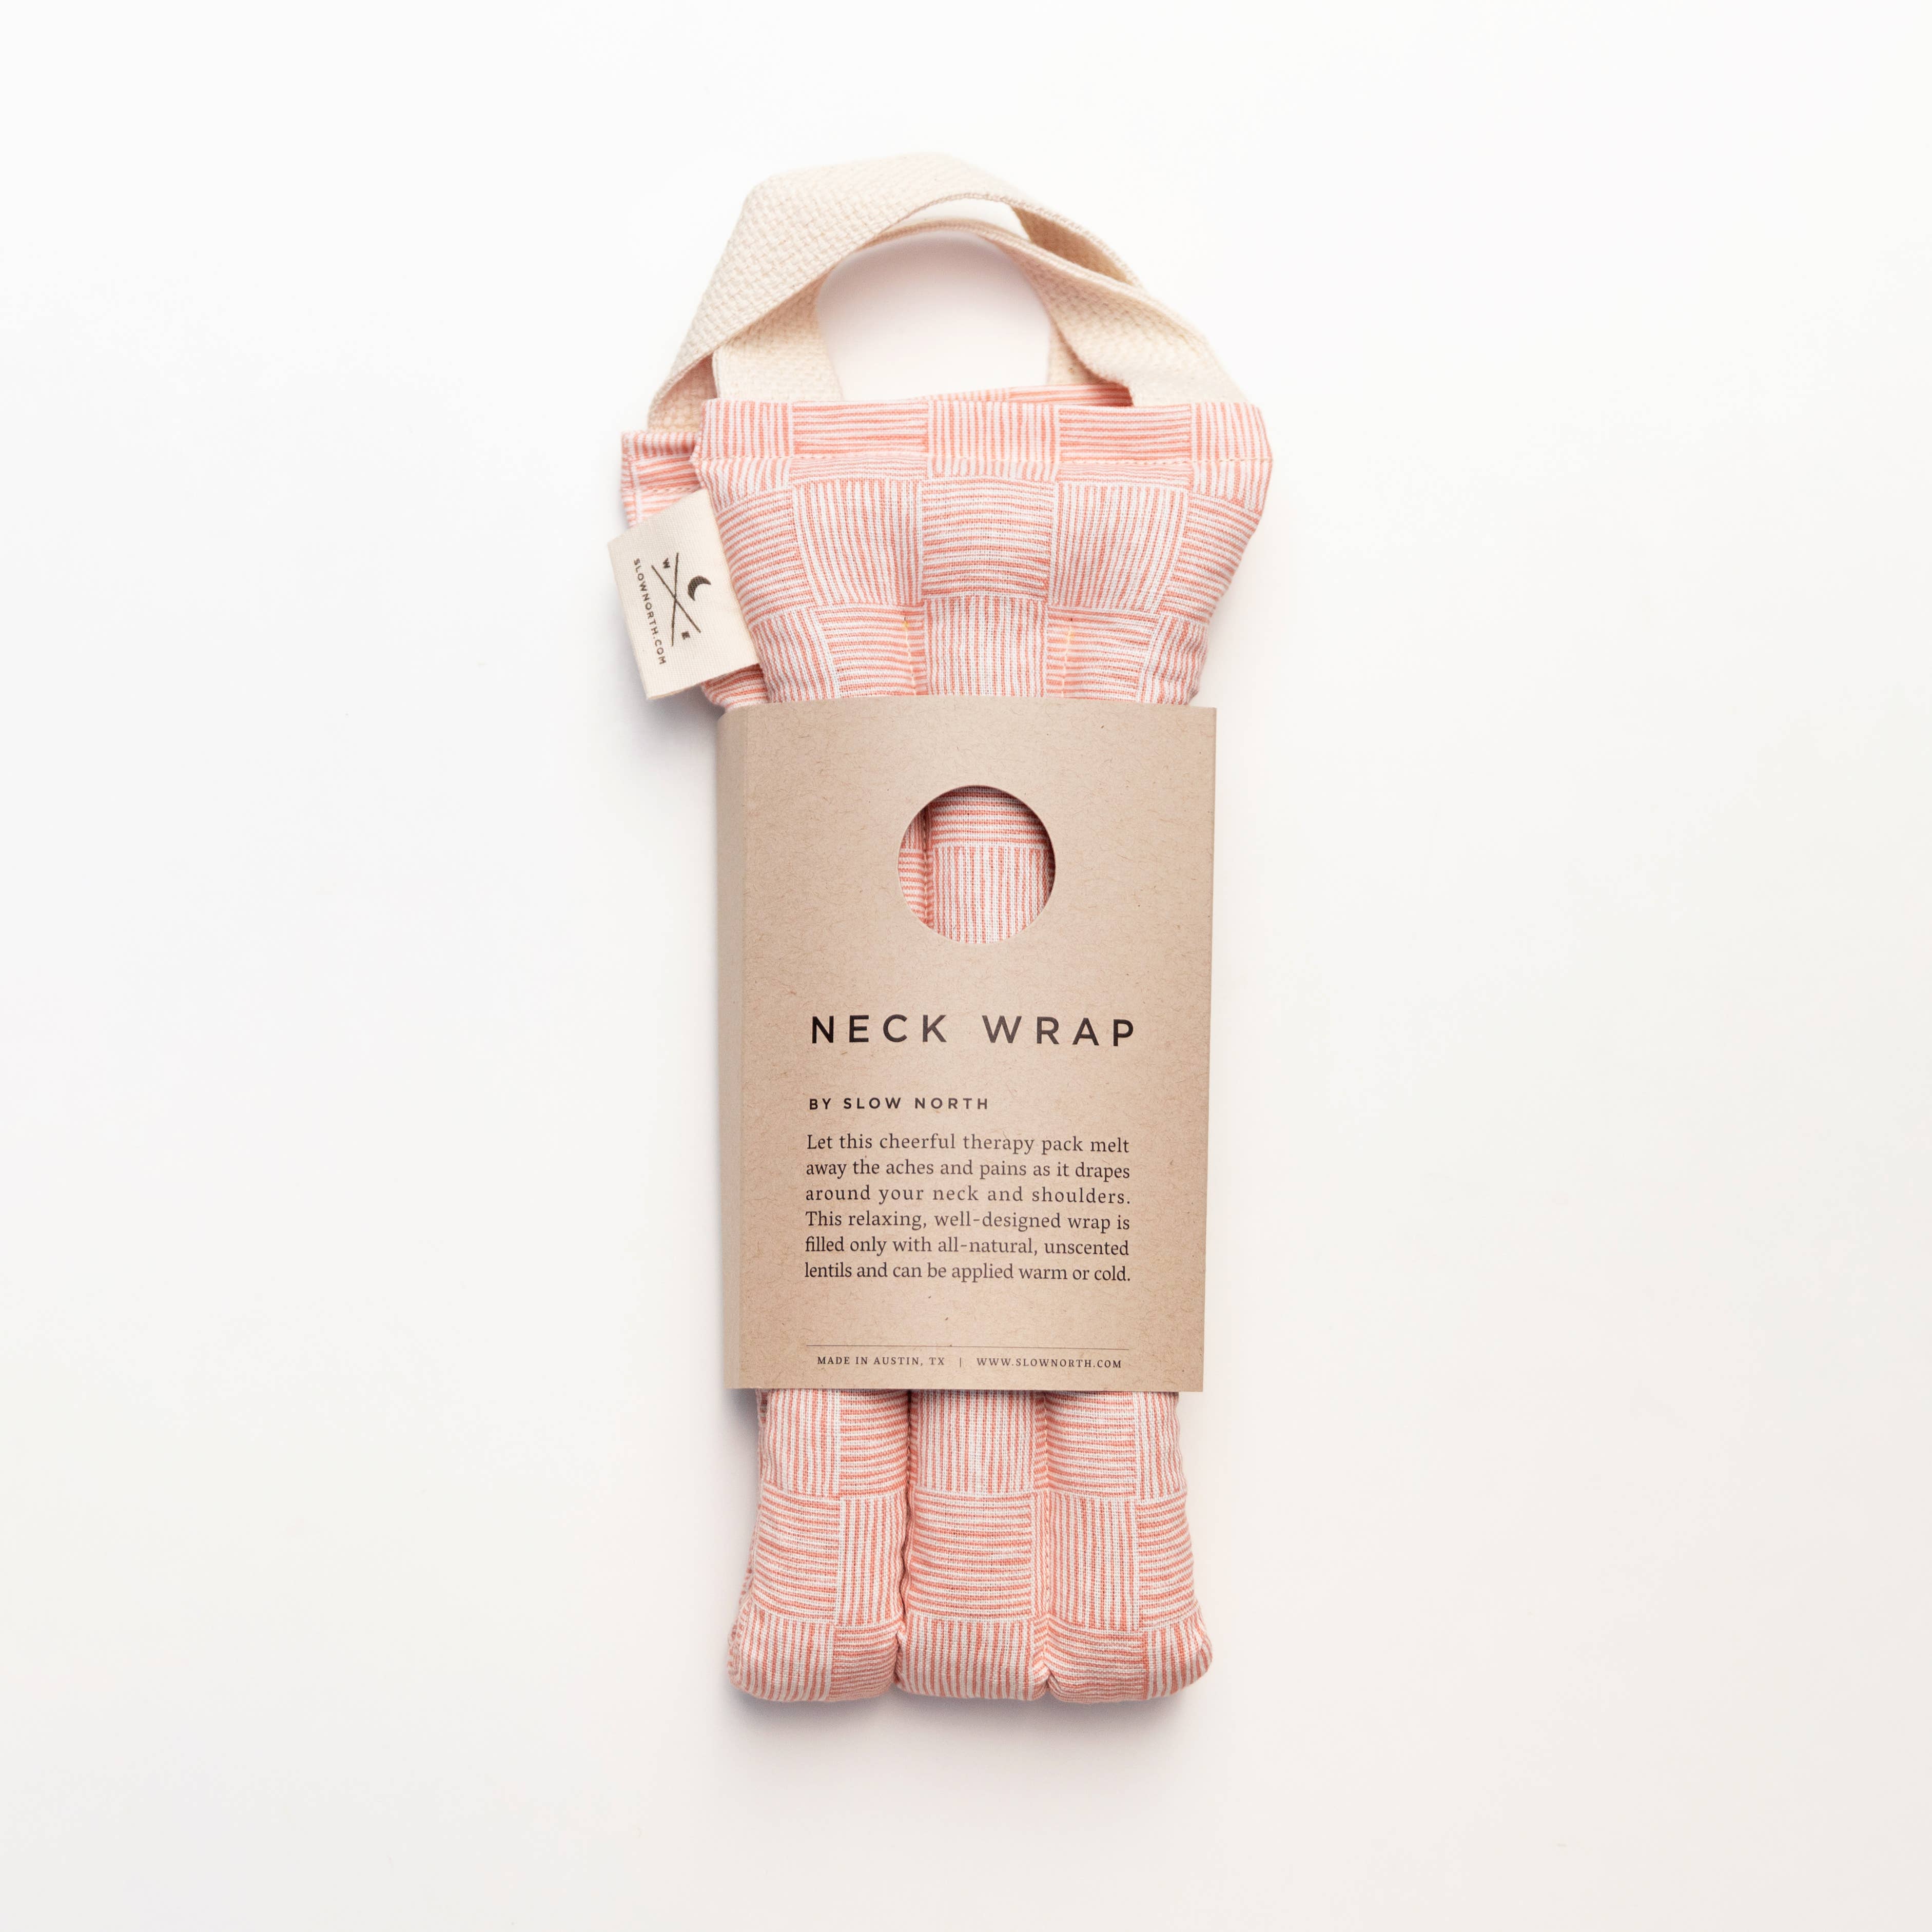 Slow North - Neck Wrap Therapy Pack - Pink Pampas